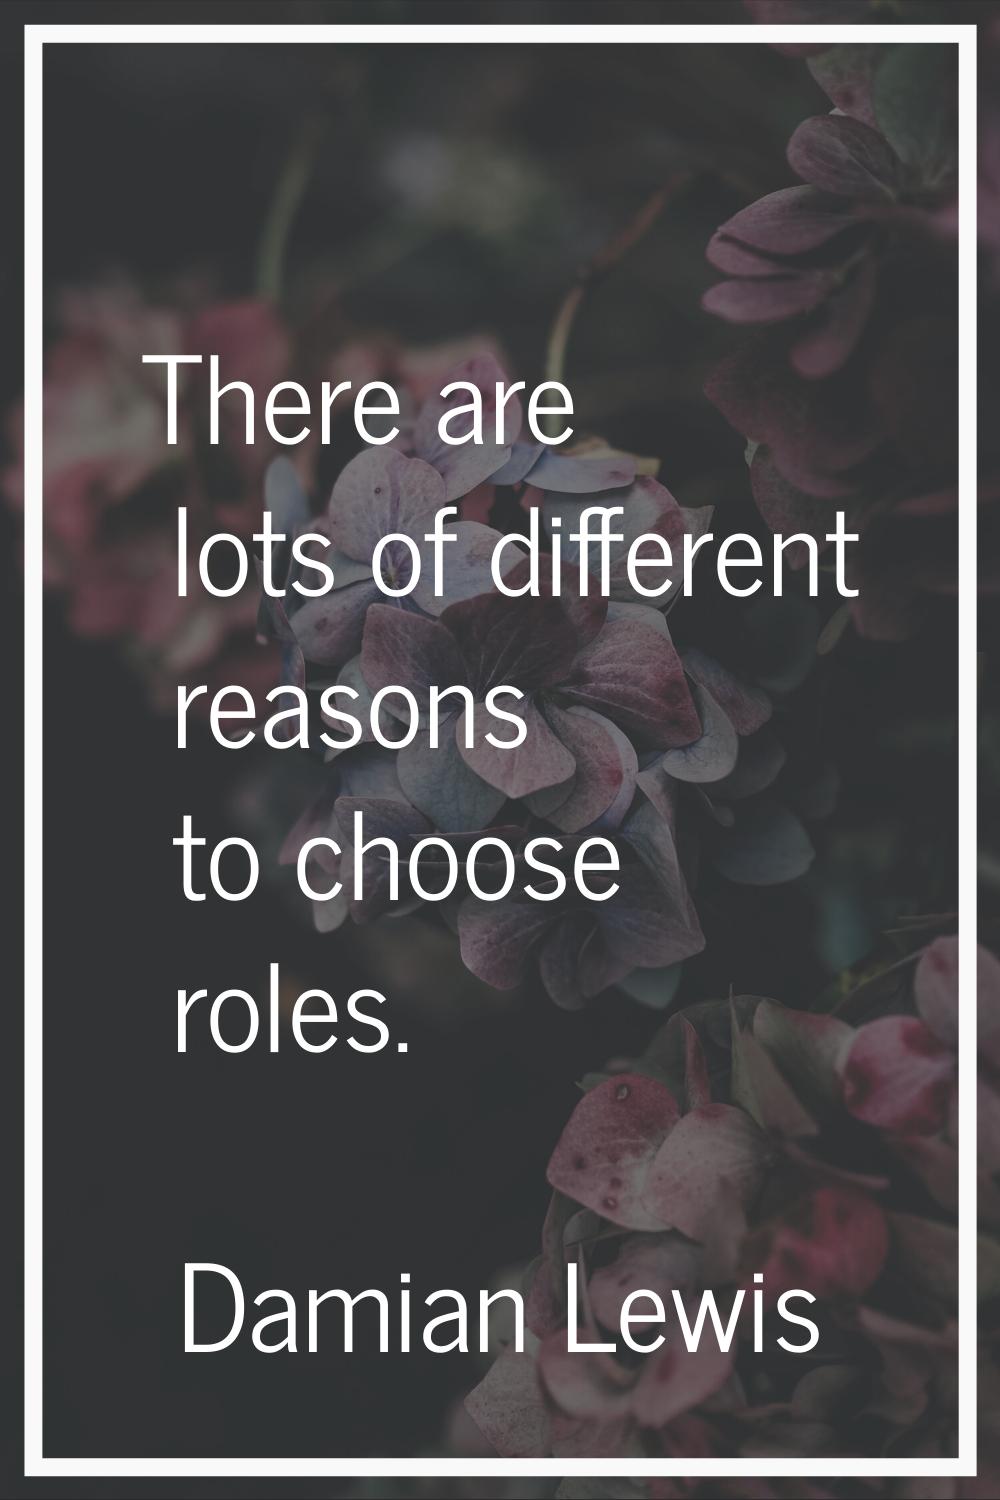 There are lots of different reasons to choose roles.